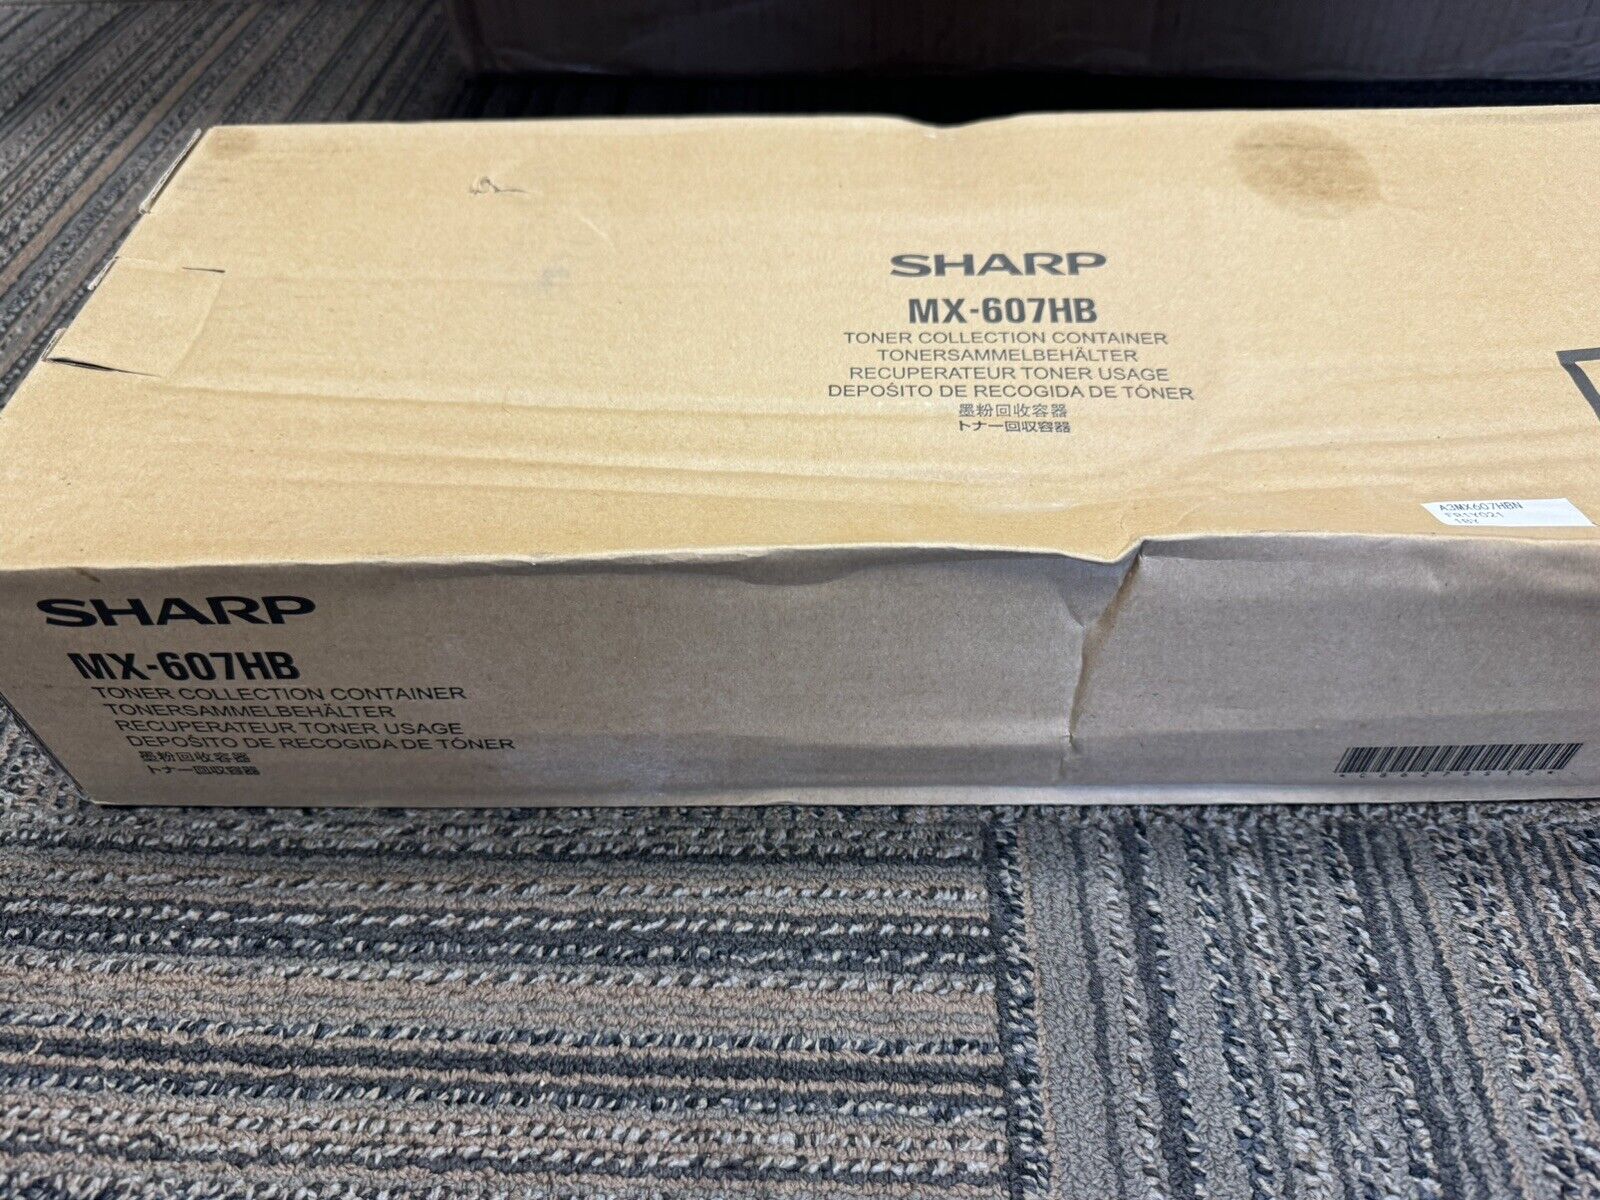 Genuine SHARP MX-607HB Toner Collection Container New in Box